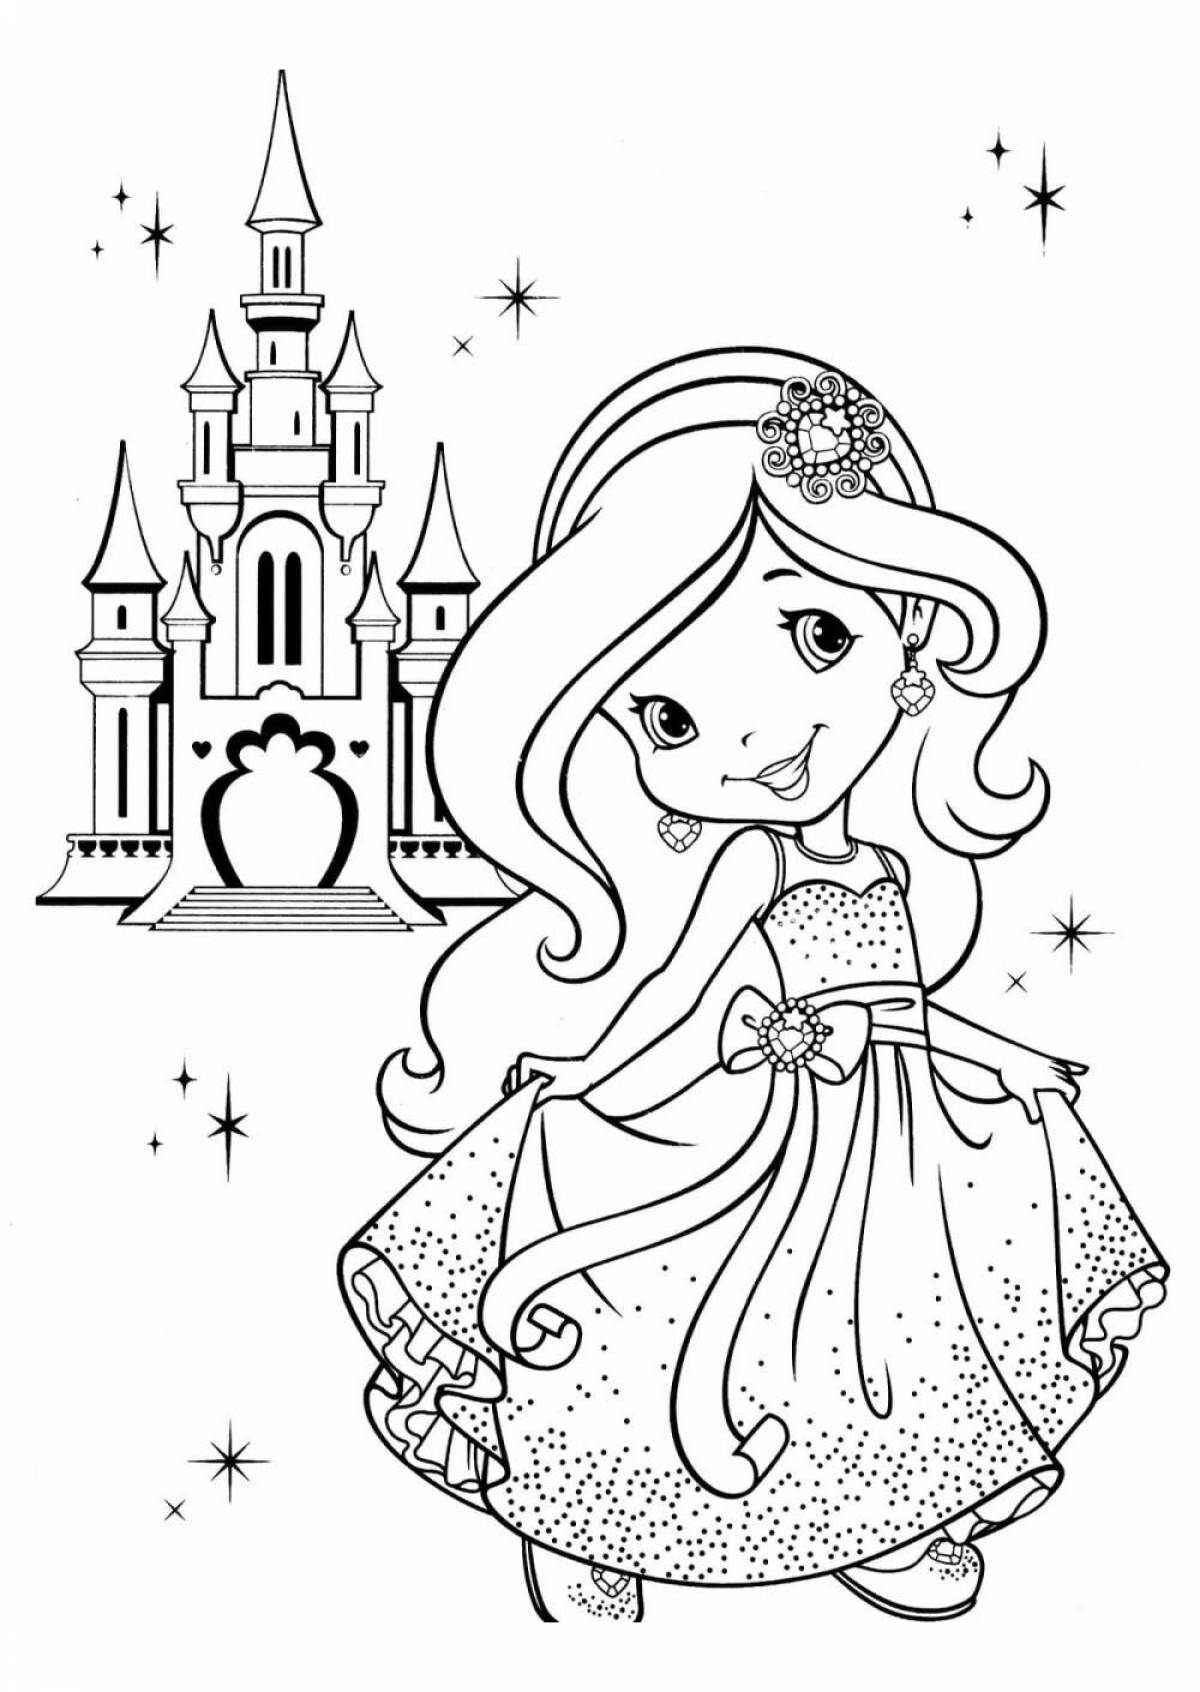 Shining coloring book for girls 6 years old